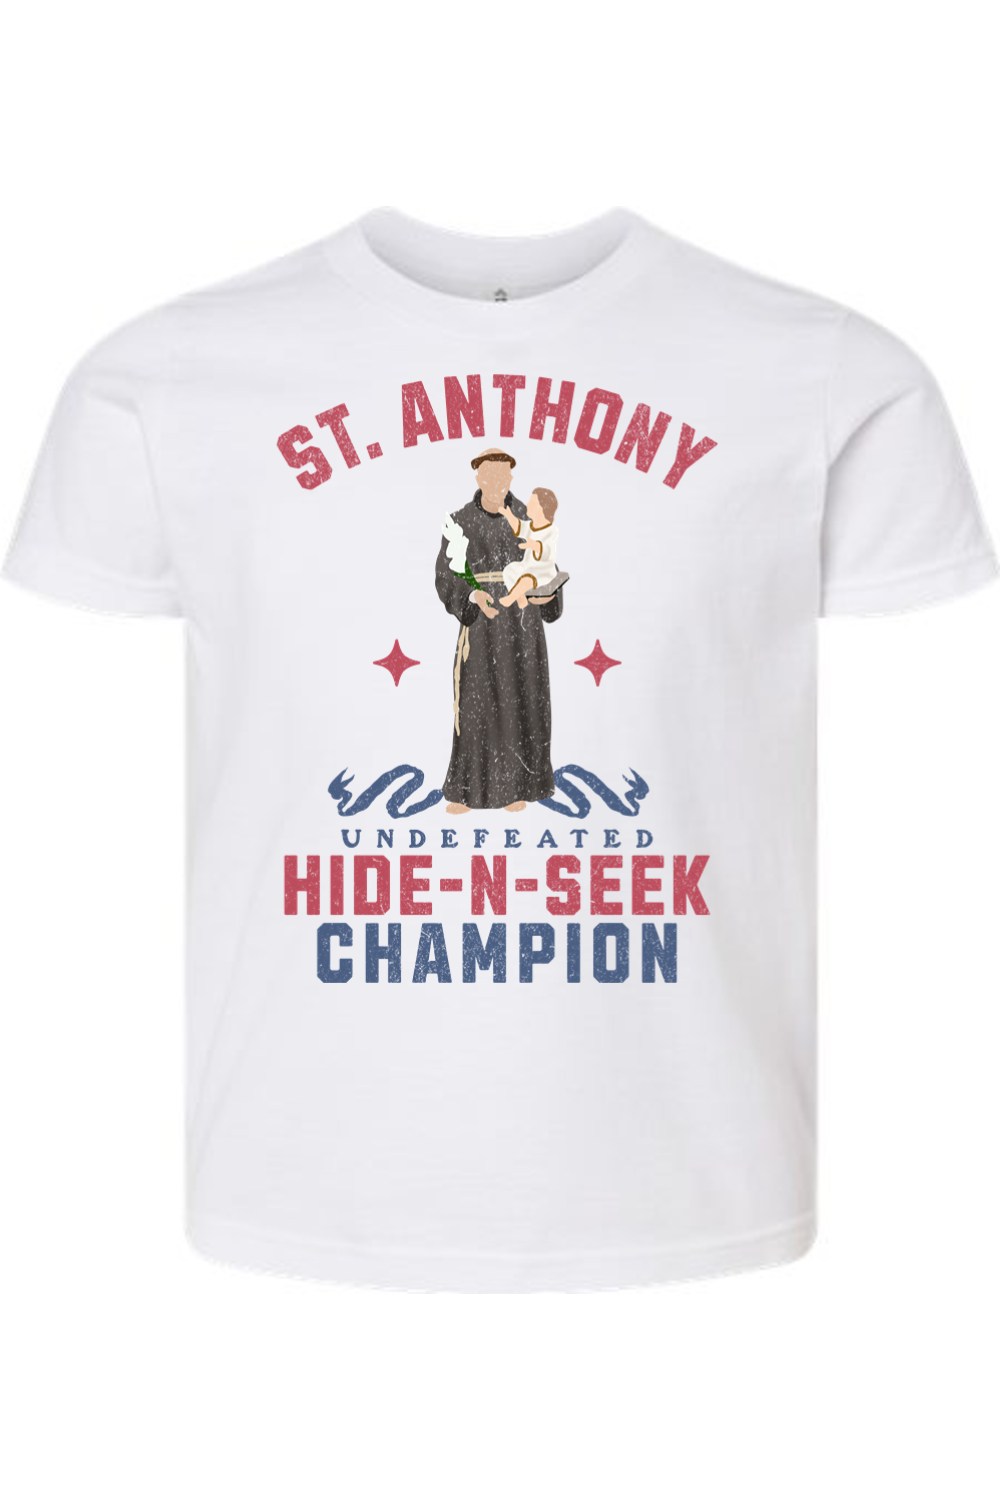 St. Anthony - Undefeated Hide and Seek Champion - Kids T-Shirt